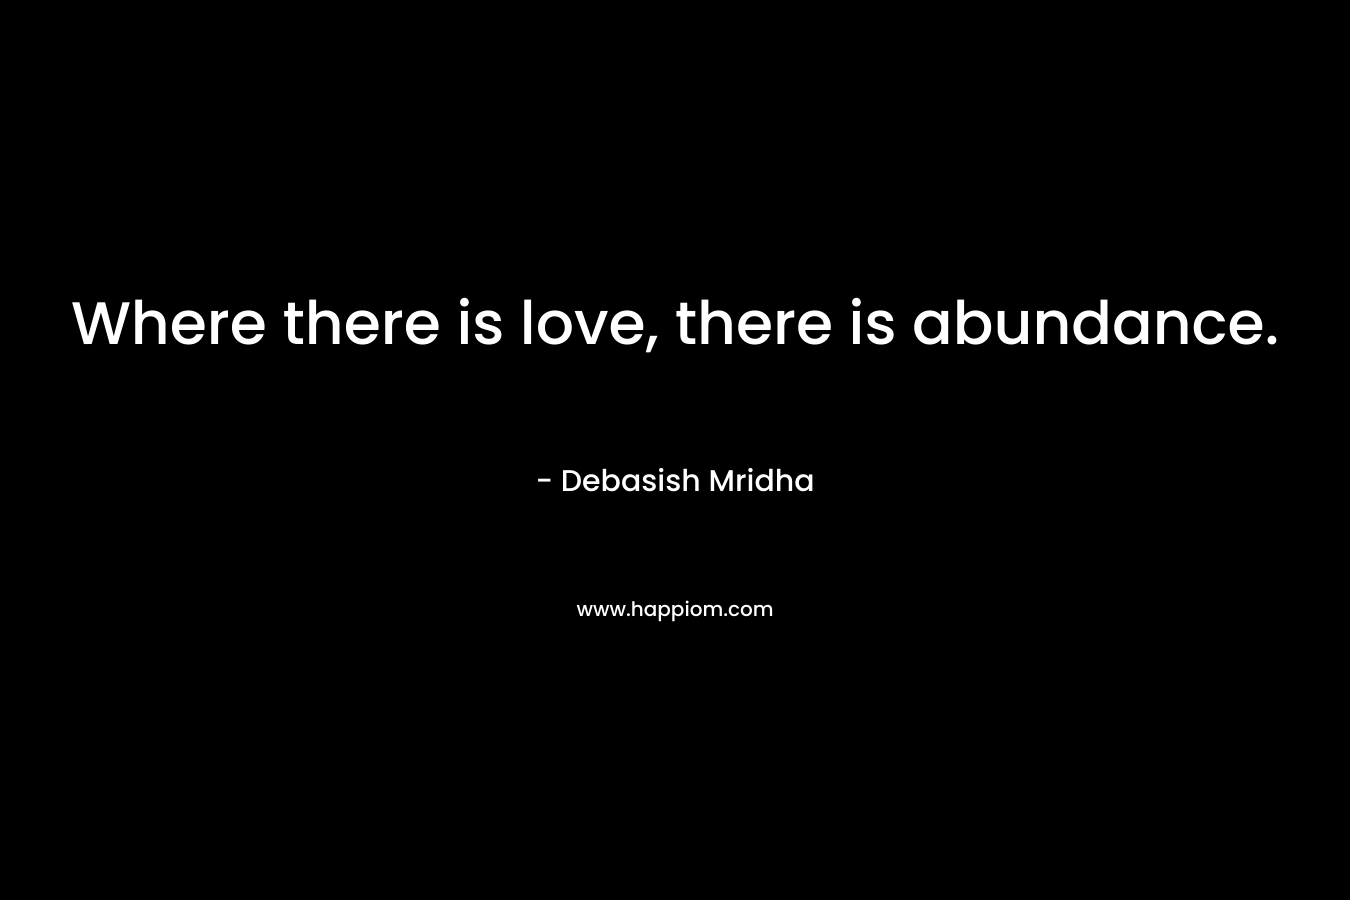 Where there is love, there is abundance.